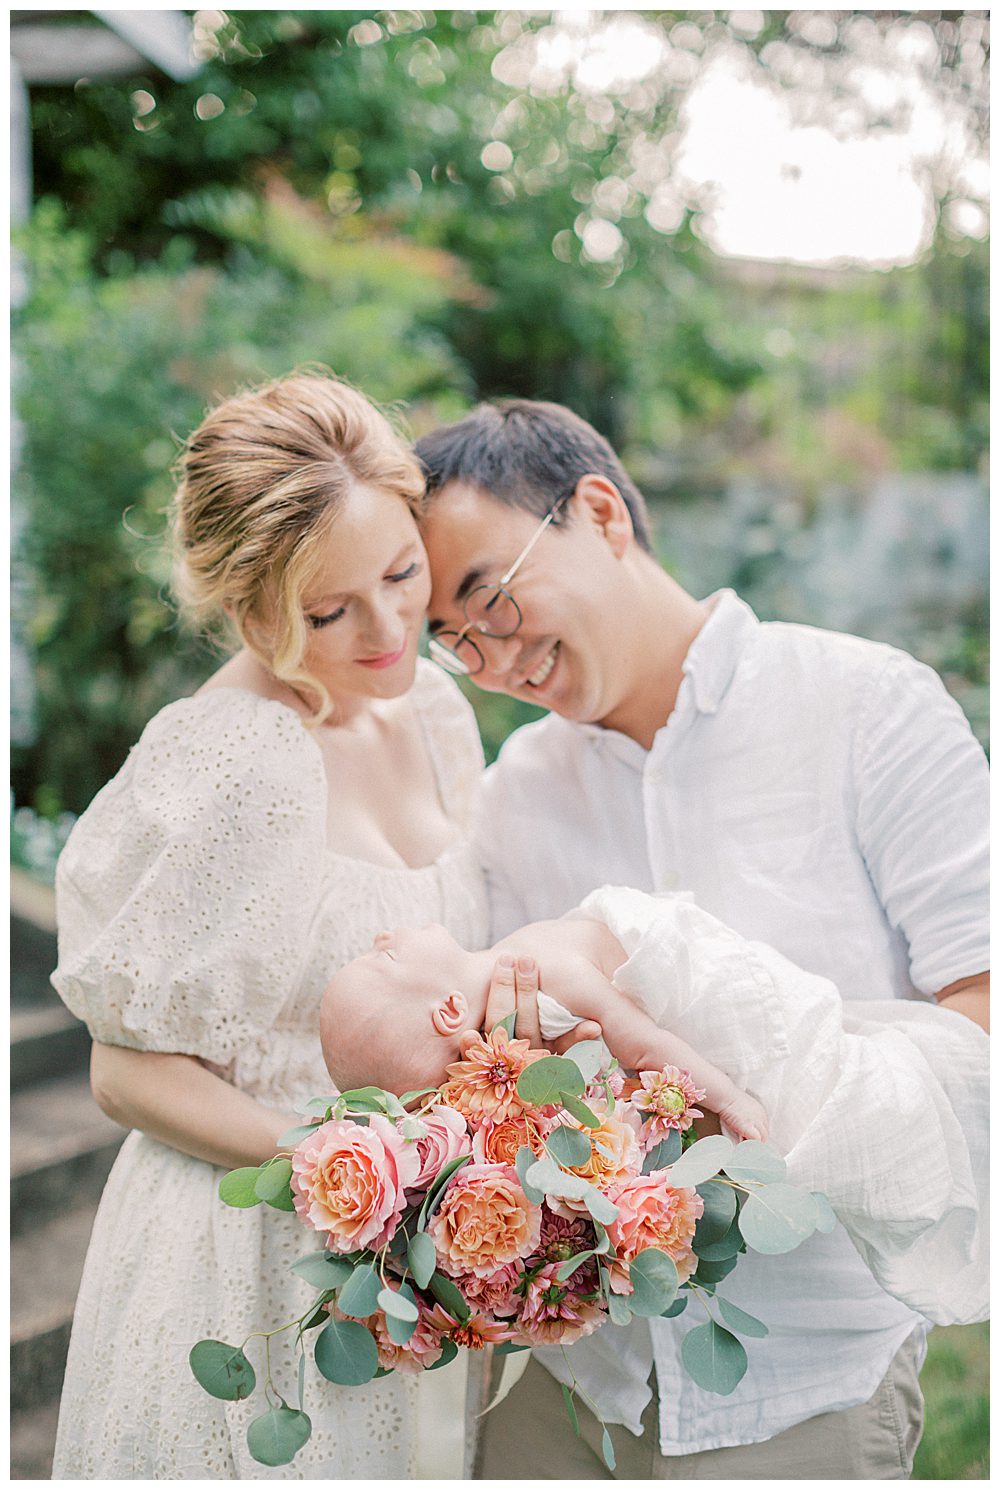 Father holds newborn daughter while leaning into his wife who holds a bouquet of roses during outdoor newborn session.